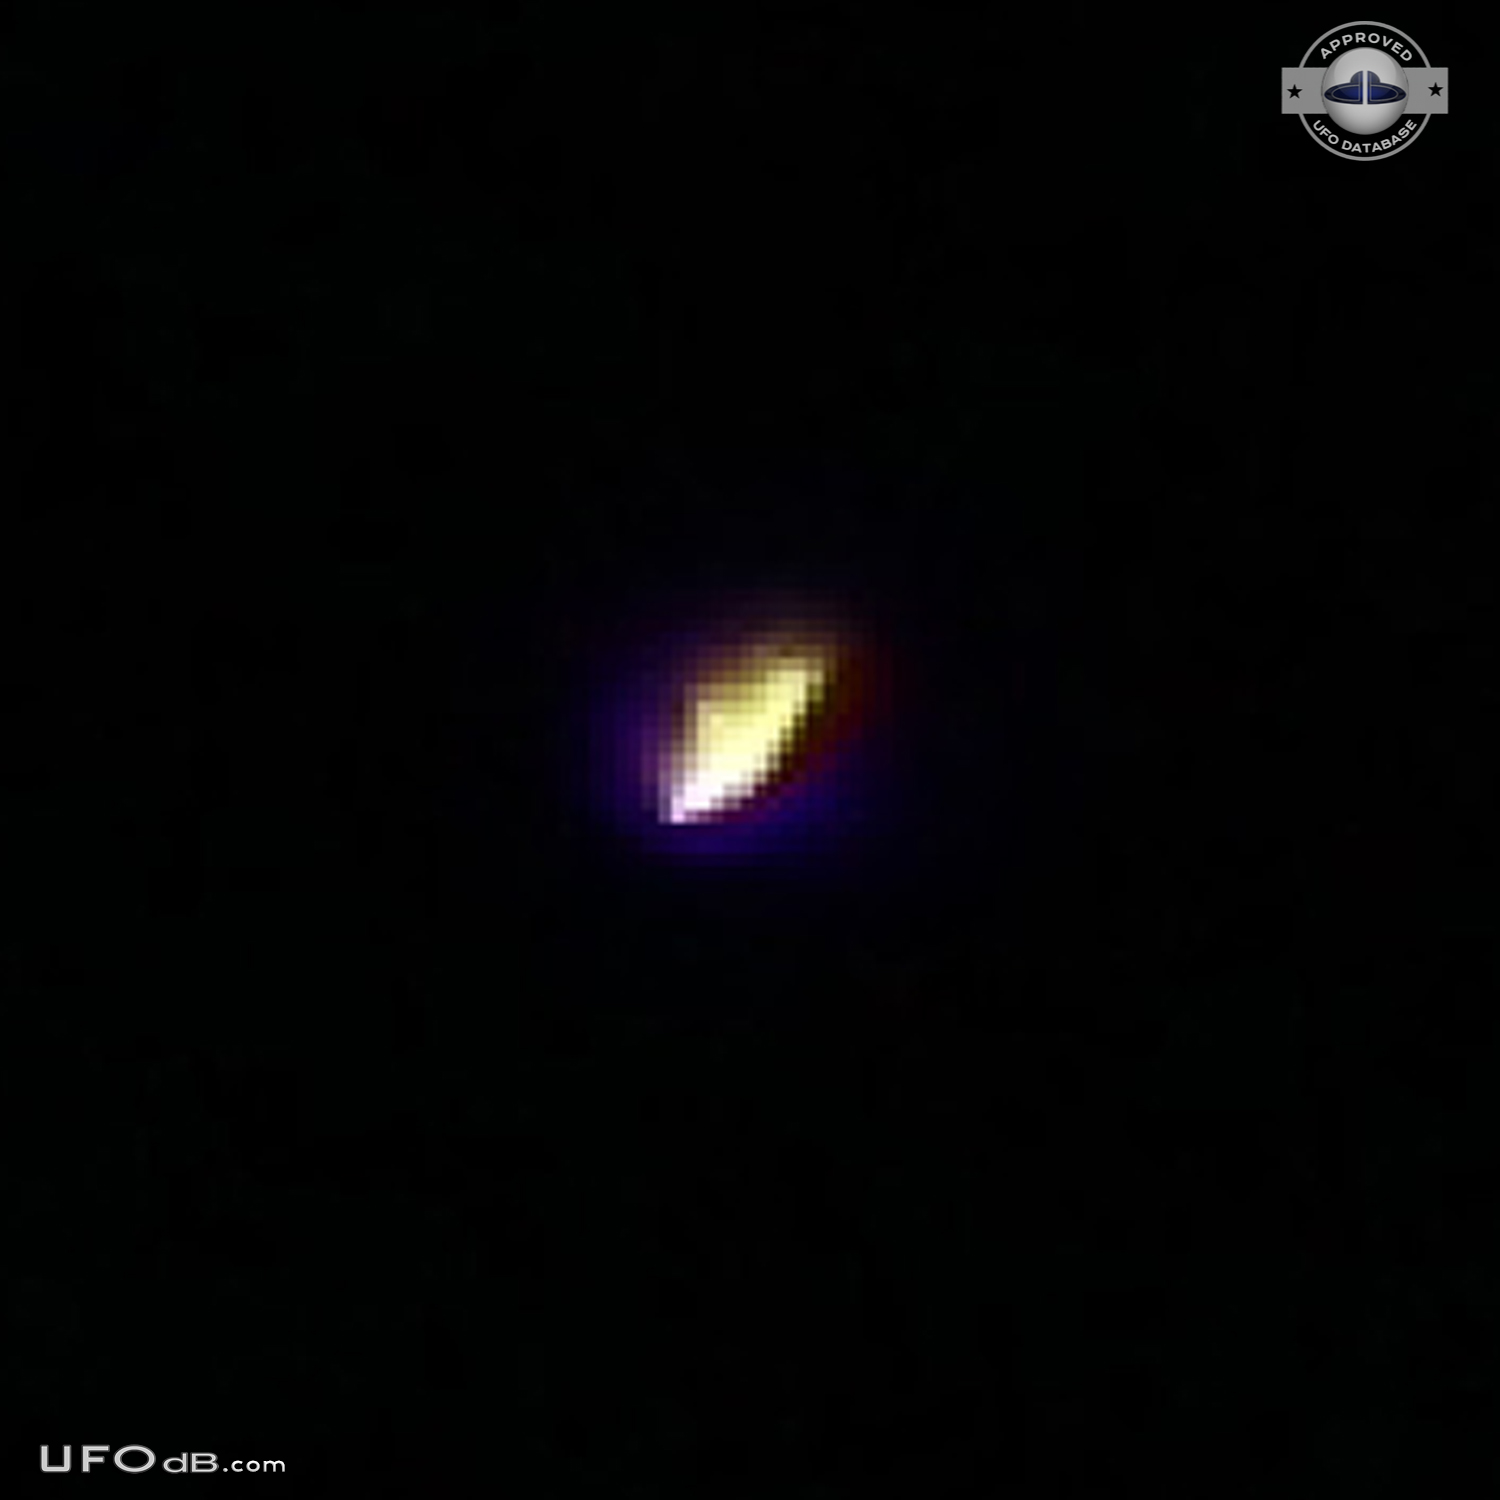 Bright mufti-colored flashing pulsating UFO on pictures - Florida 2012 UFO Picture #524-4